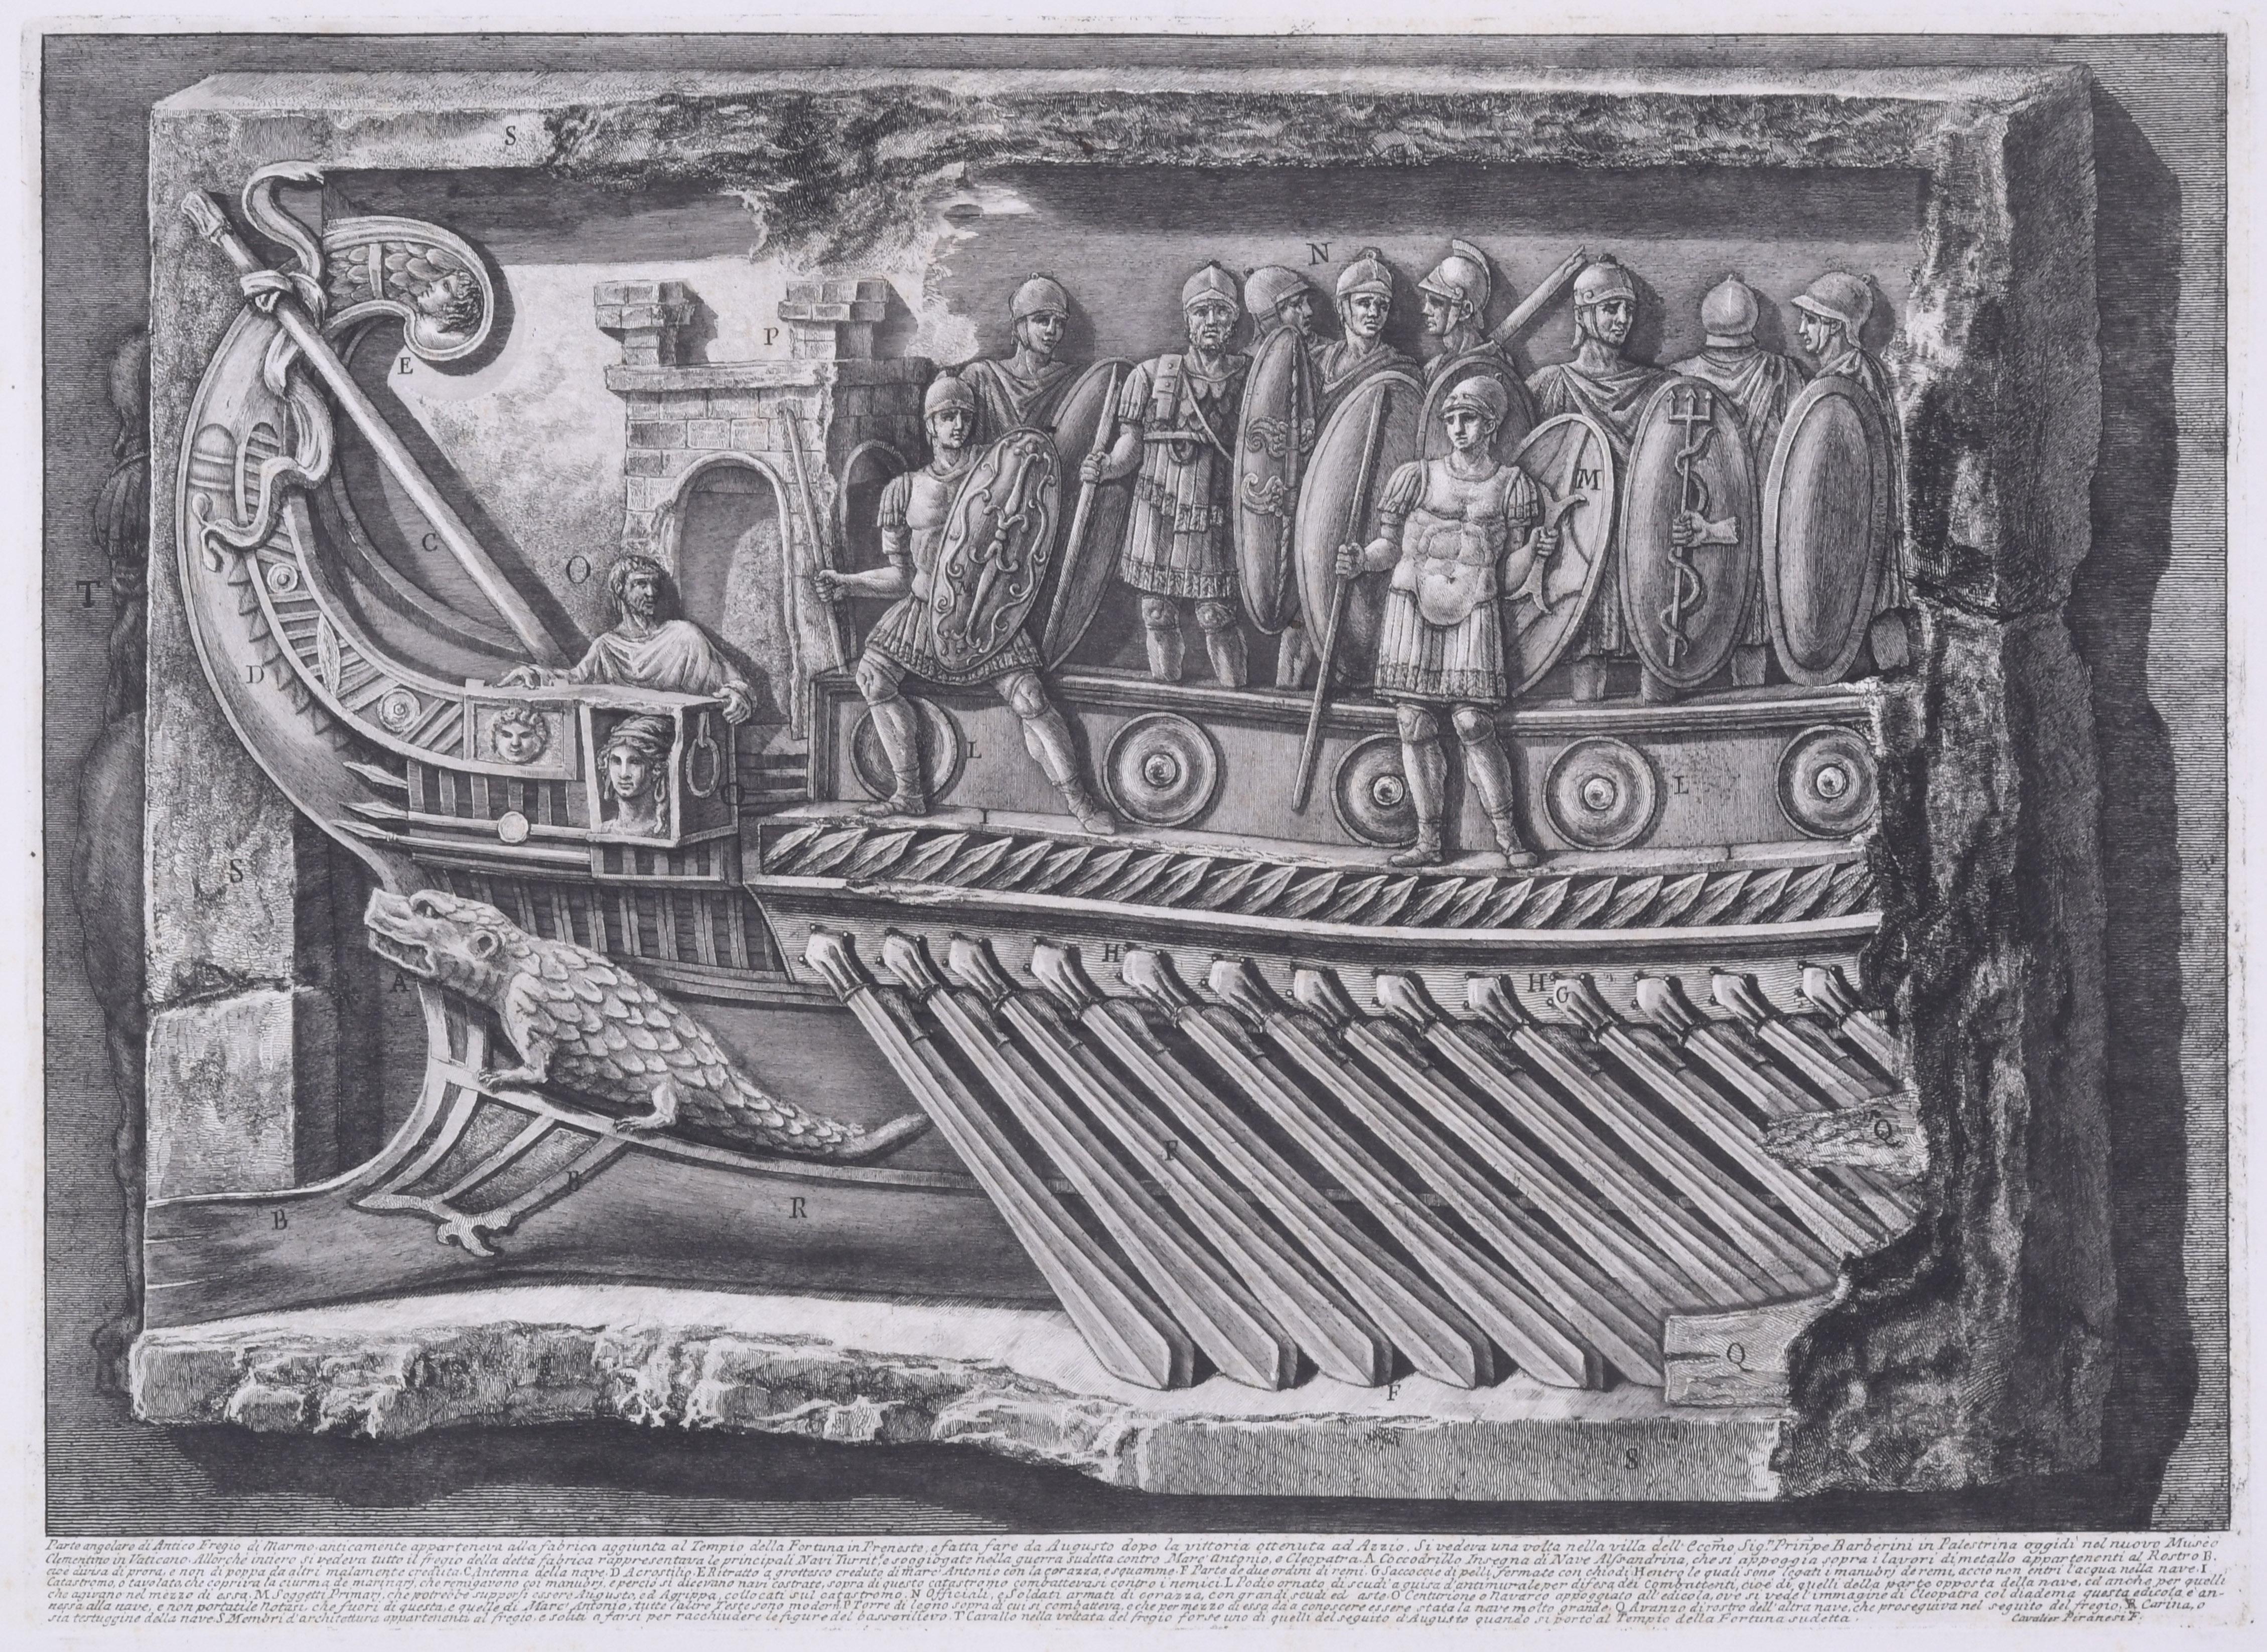 Marble relief of a trireme from the Temple of Fortuna, Praeneste, from Vasi